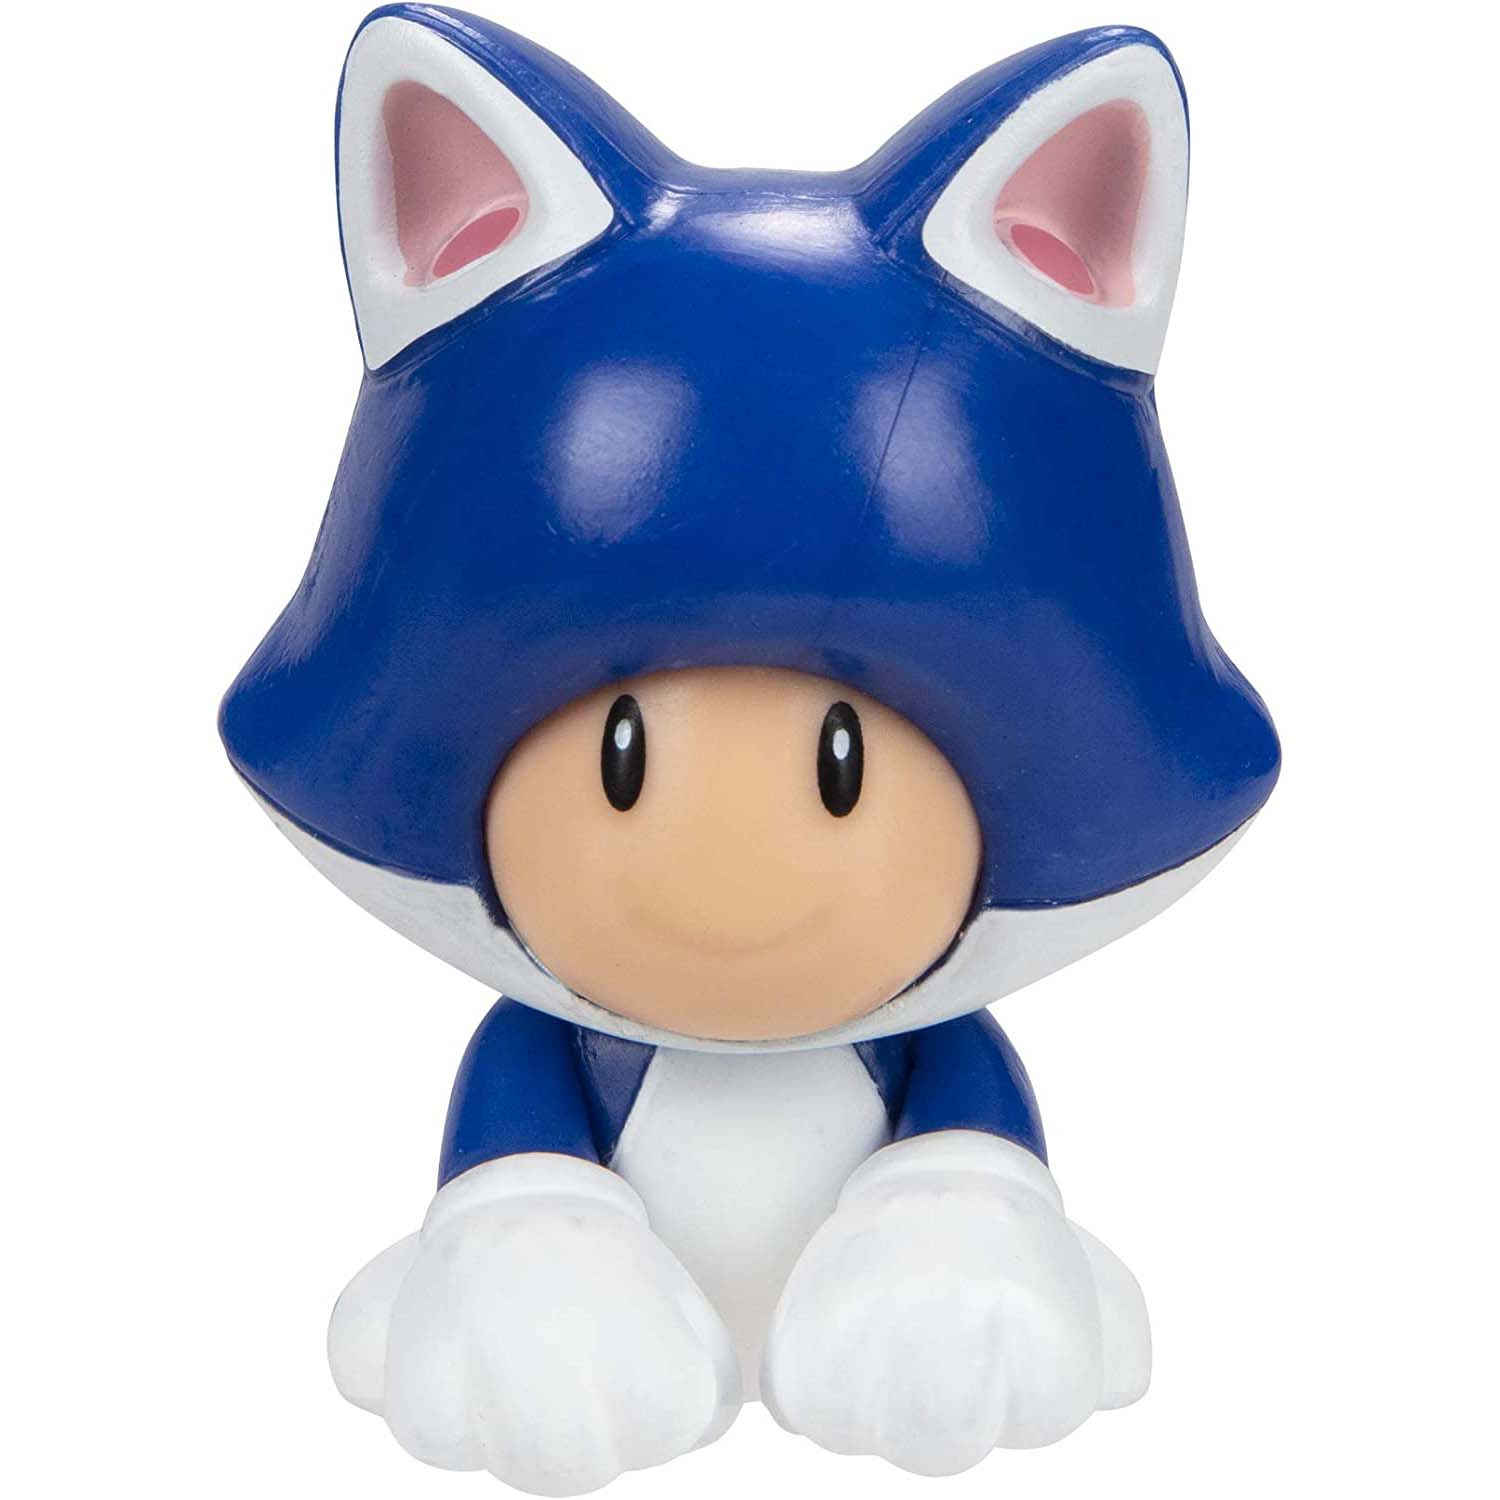 World of Nintendo 2.5" Cat Toad Action Figure